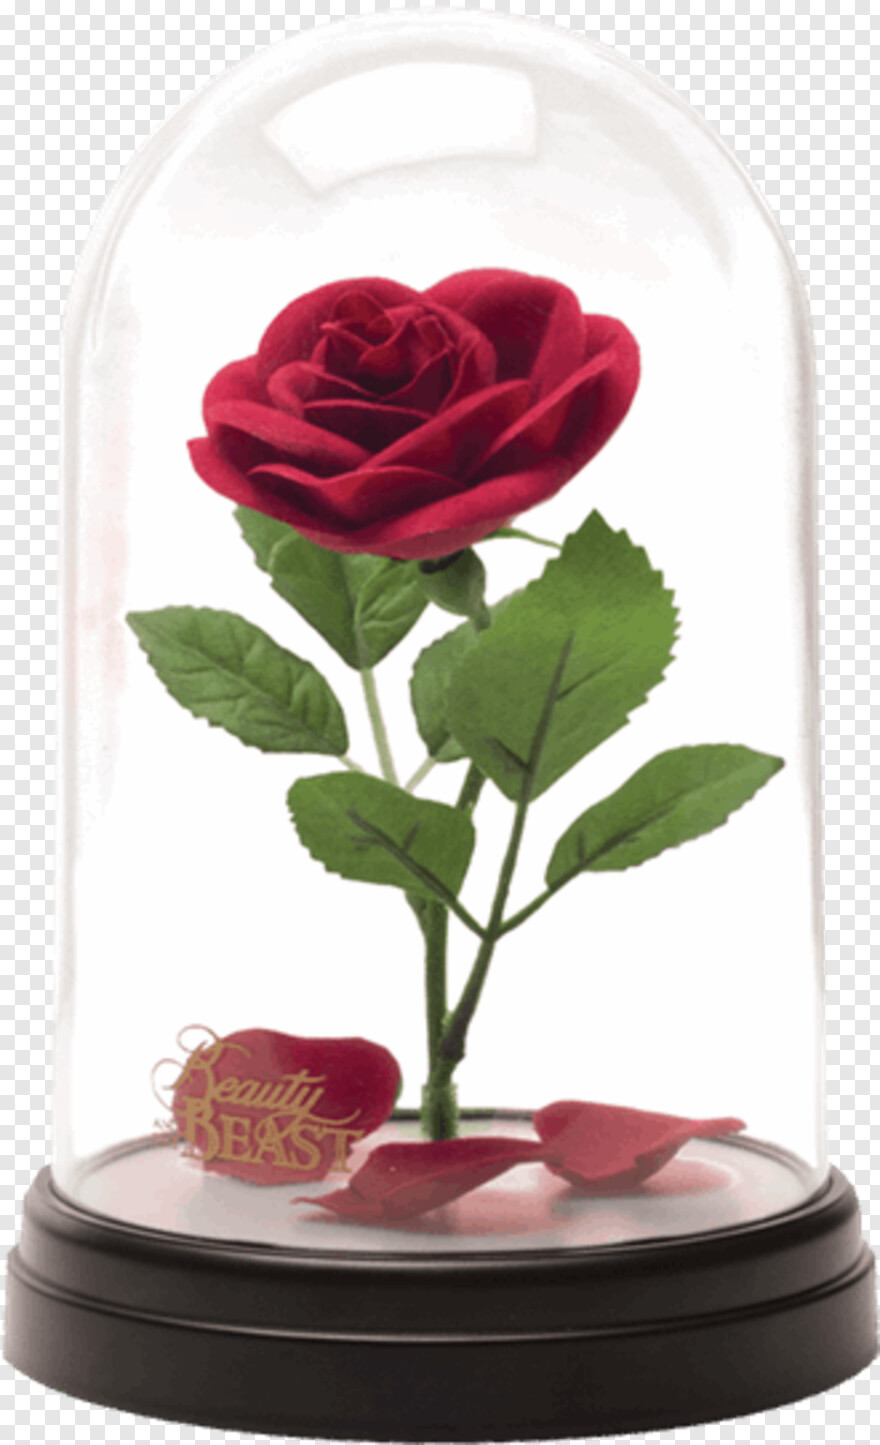 beauty-and-the-beast-rose # 523818